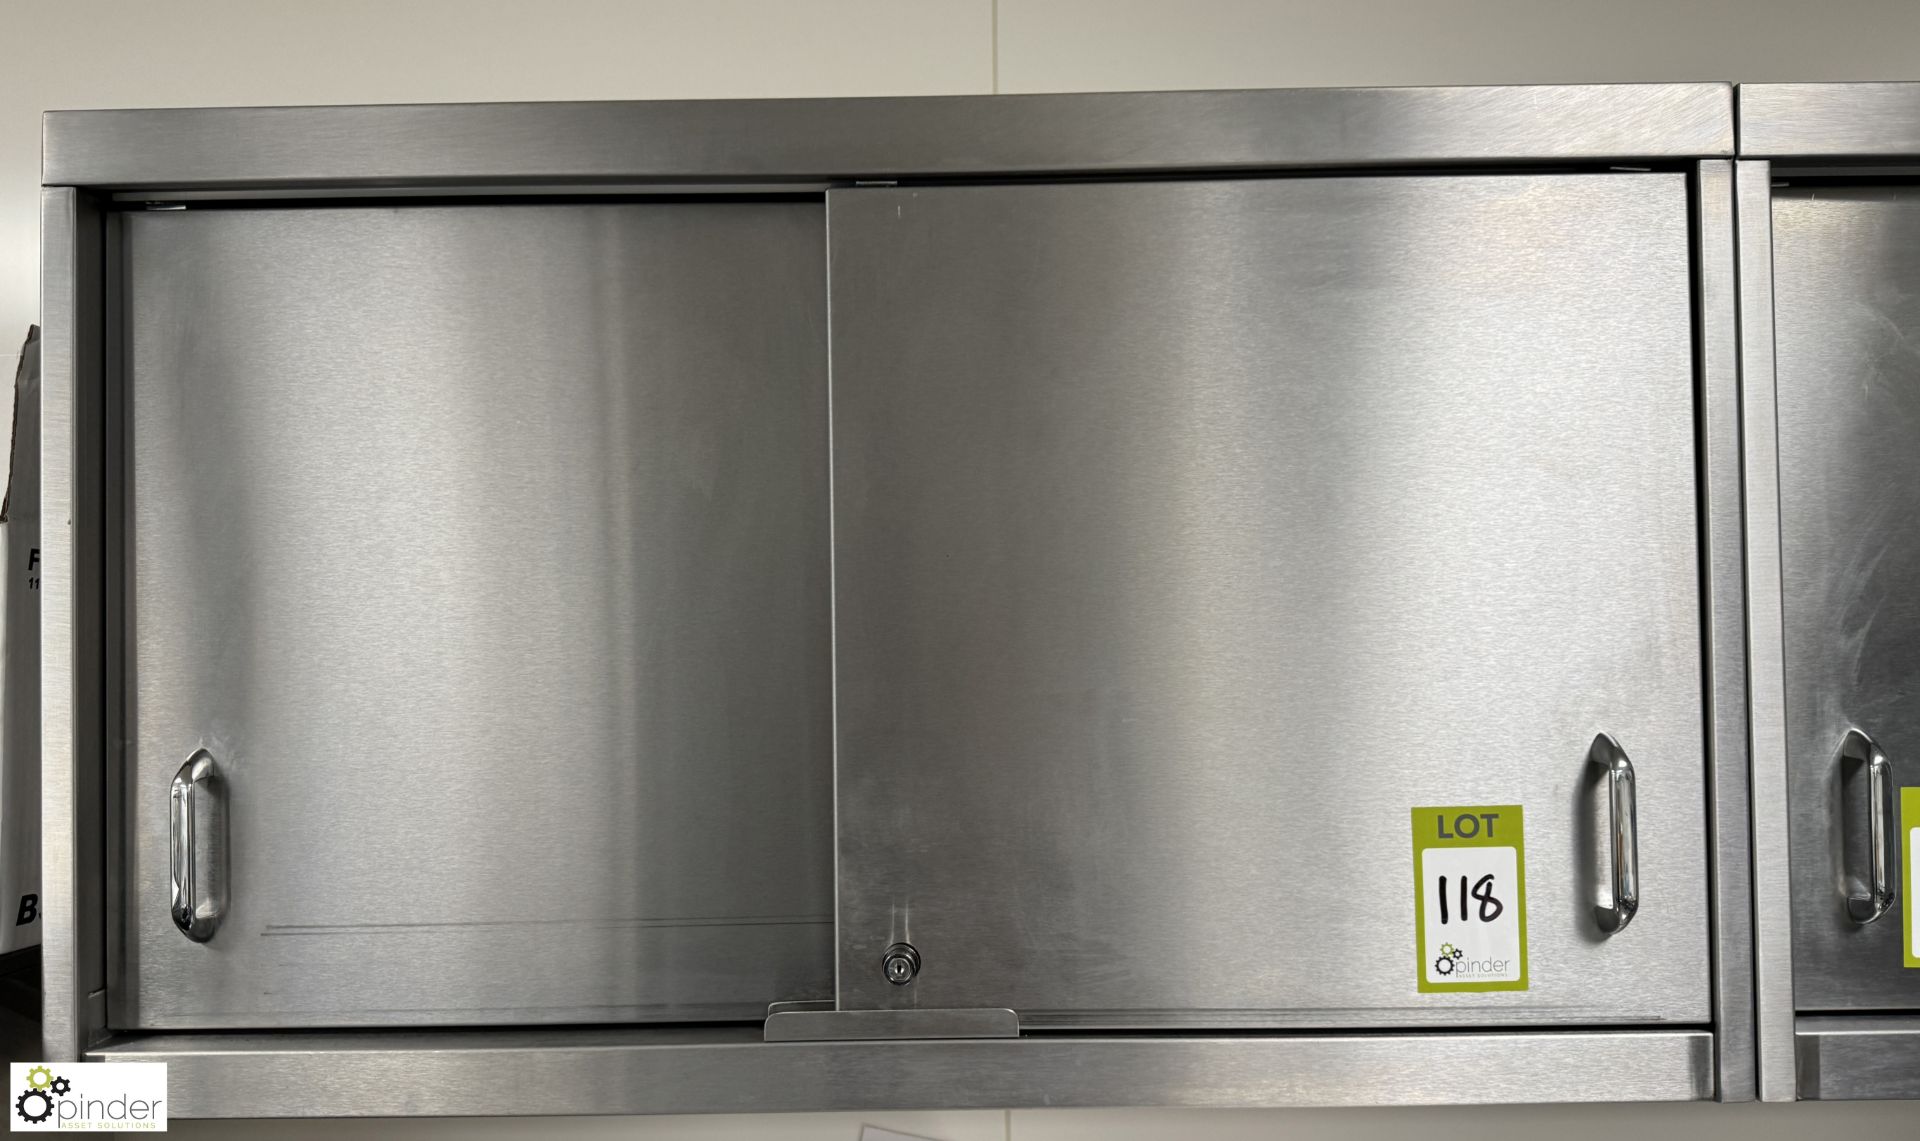 2 stainless steel wall mounted Cabinets, 1000mm x 300mm x 600mm (location in building - level 7) - Image 3 of 5